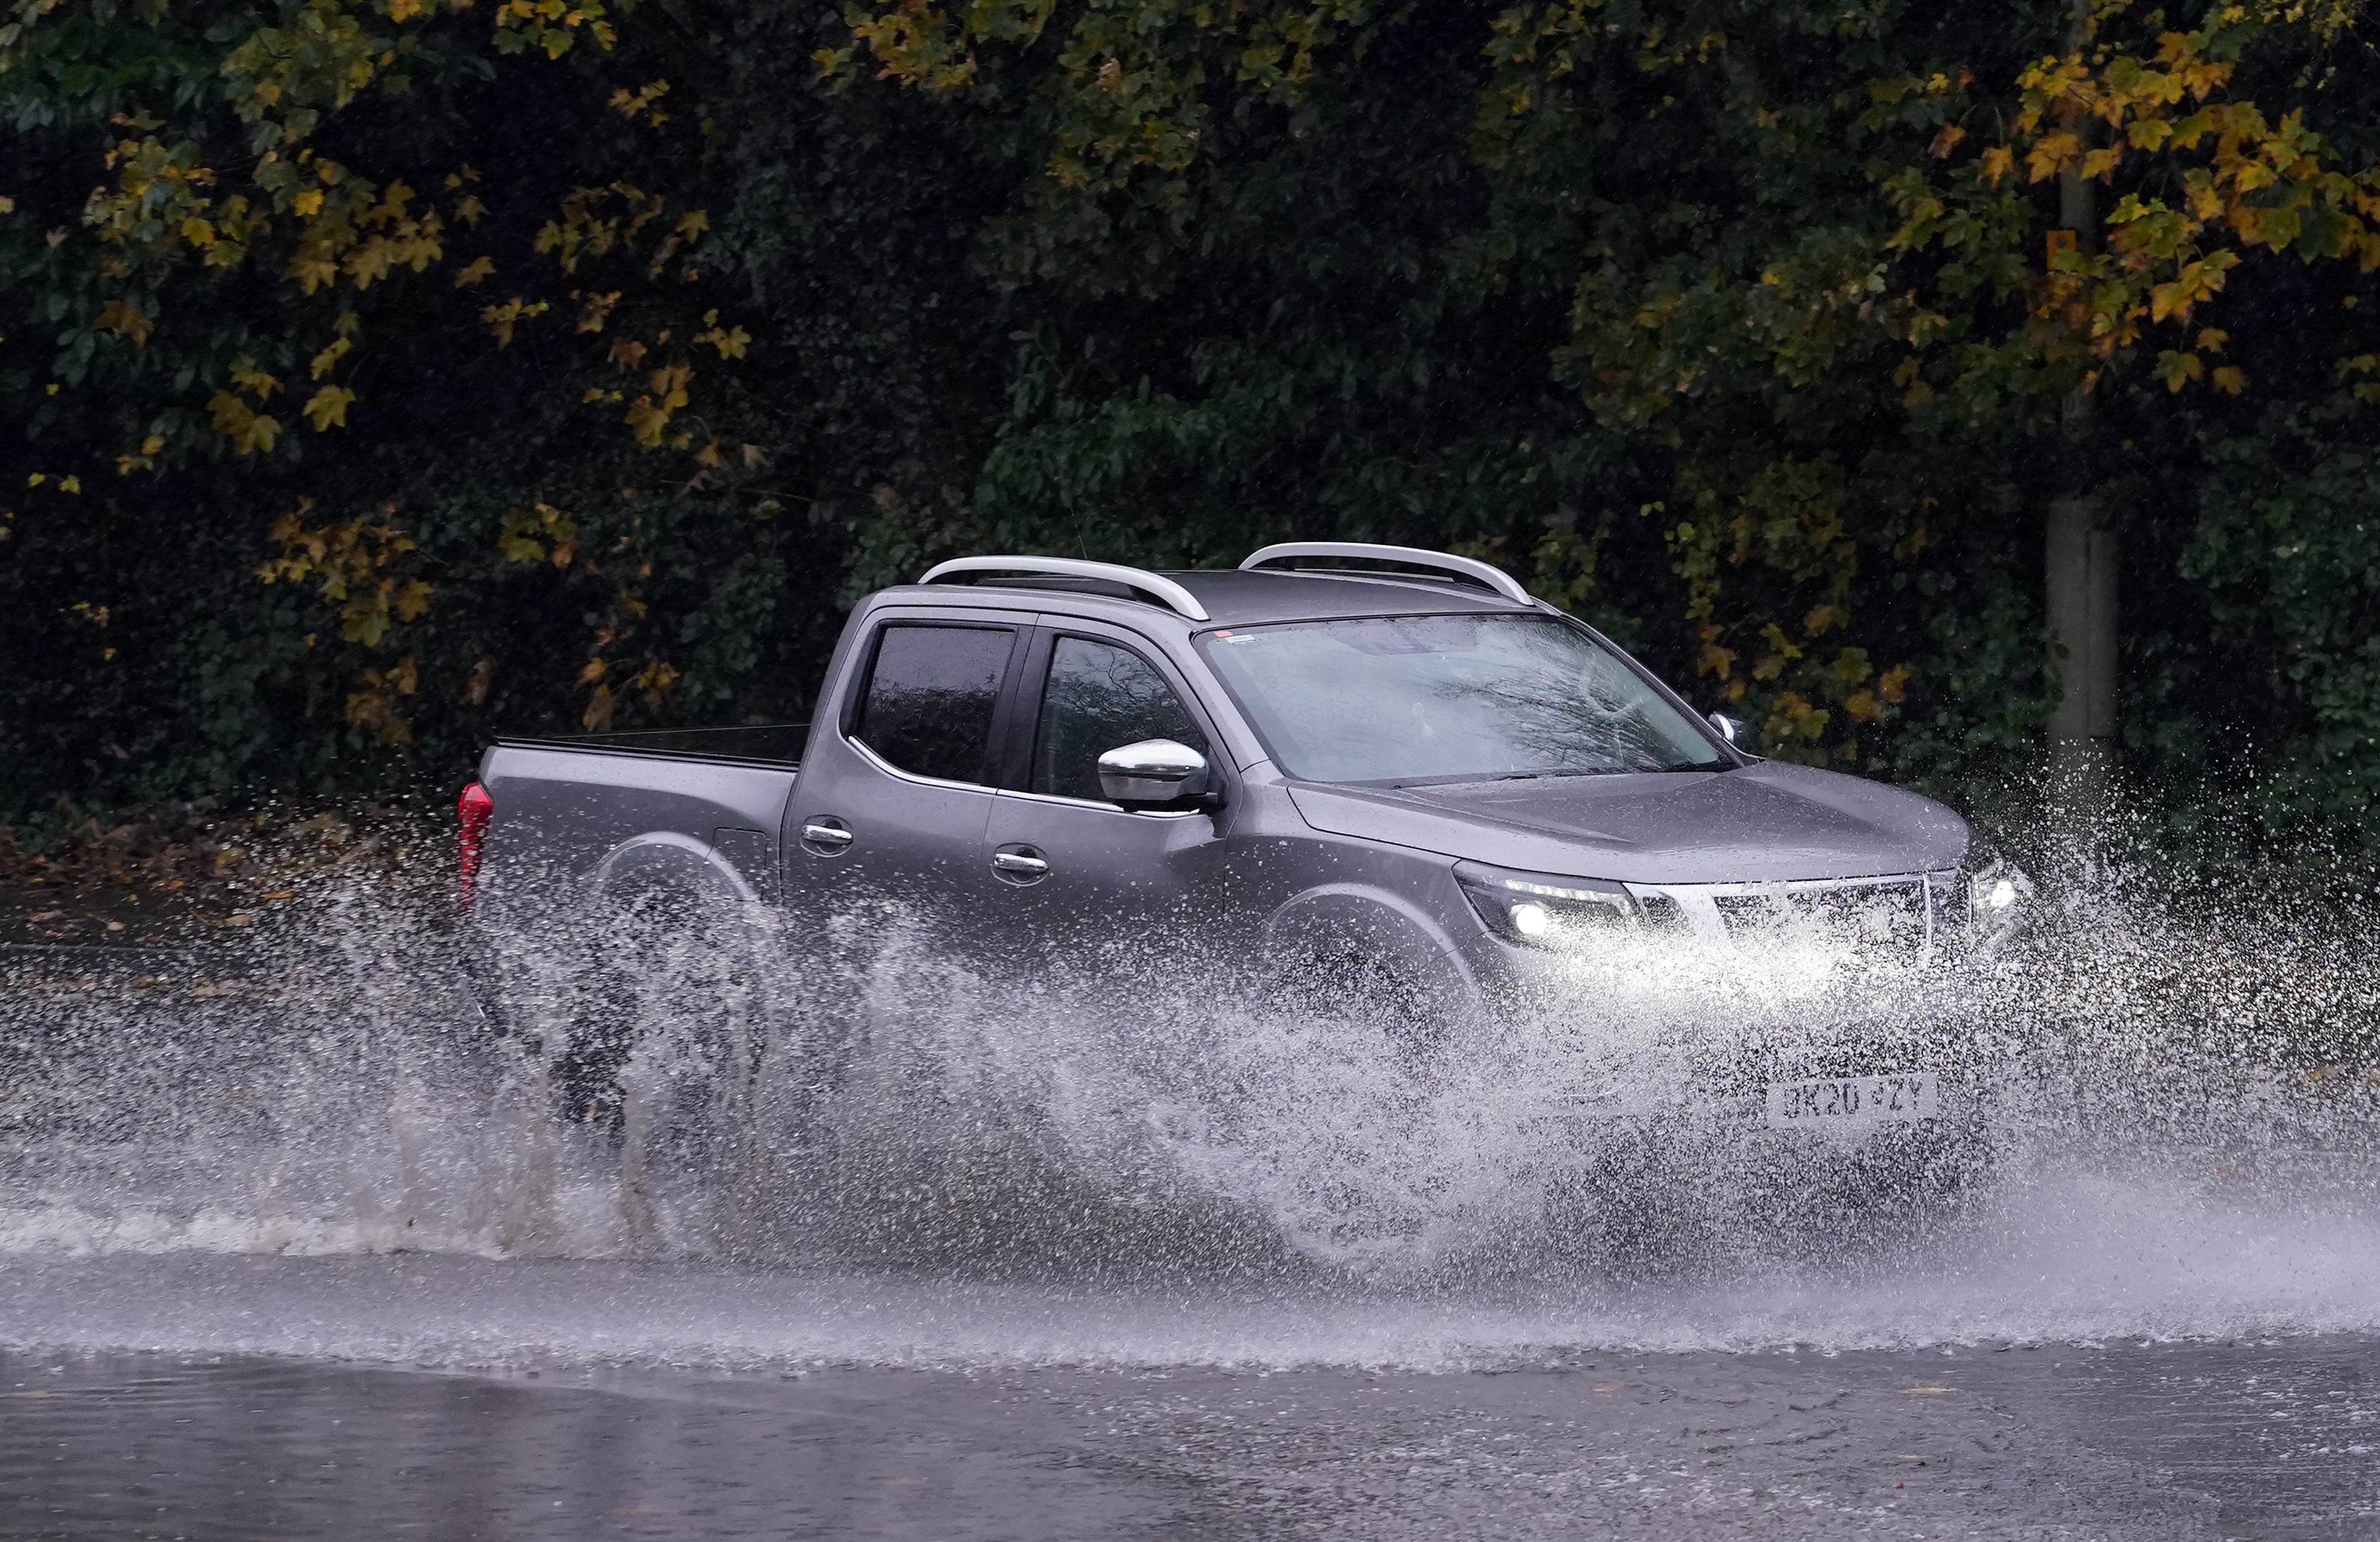 Cars pass through a flooded road in Ashford, Kent on Tuesday